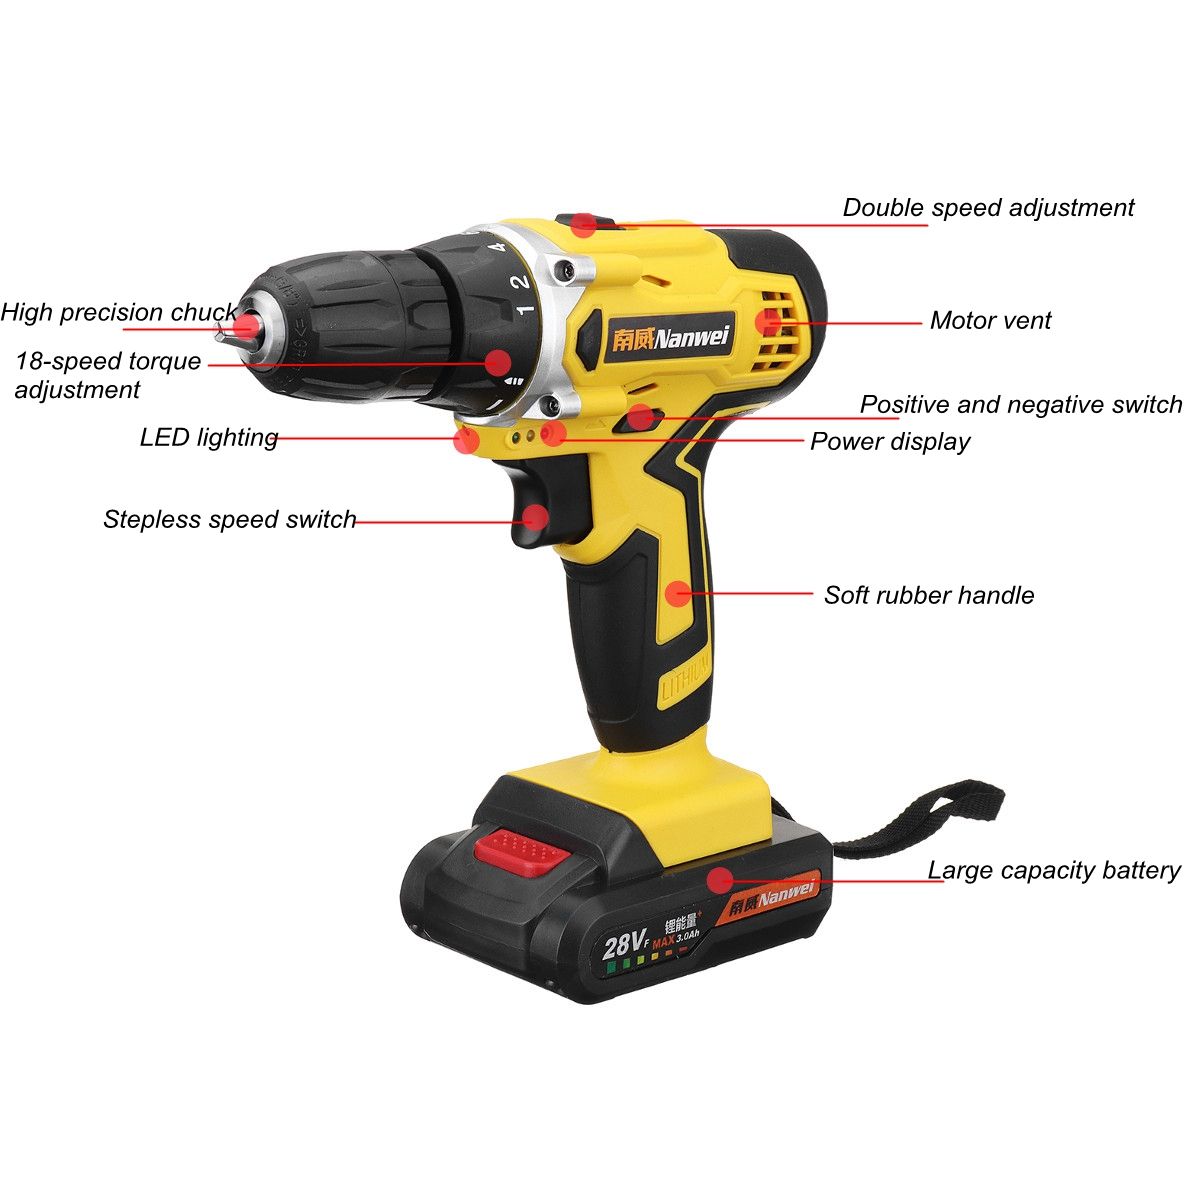 NW-28SY-2-28V-Cordless-Drill-Driver-Rechargable-Electric-Drill-Power-Drills-Driver-08-10mm-1414379